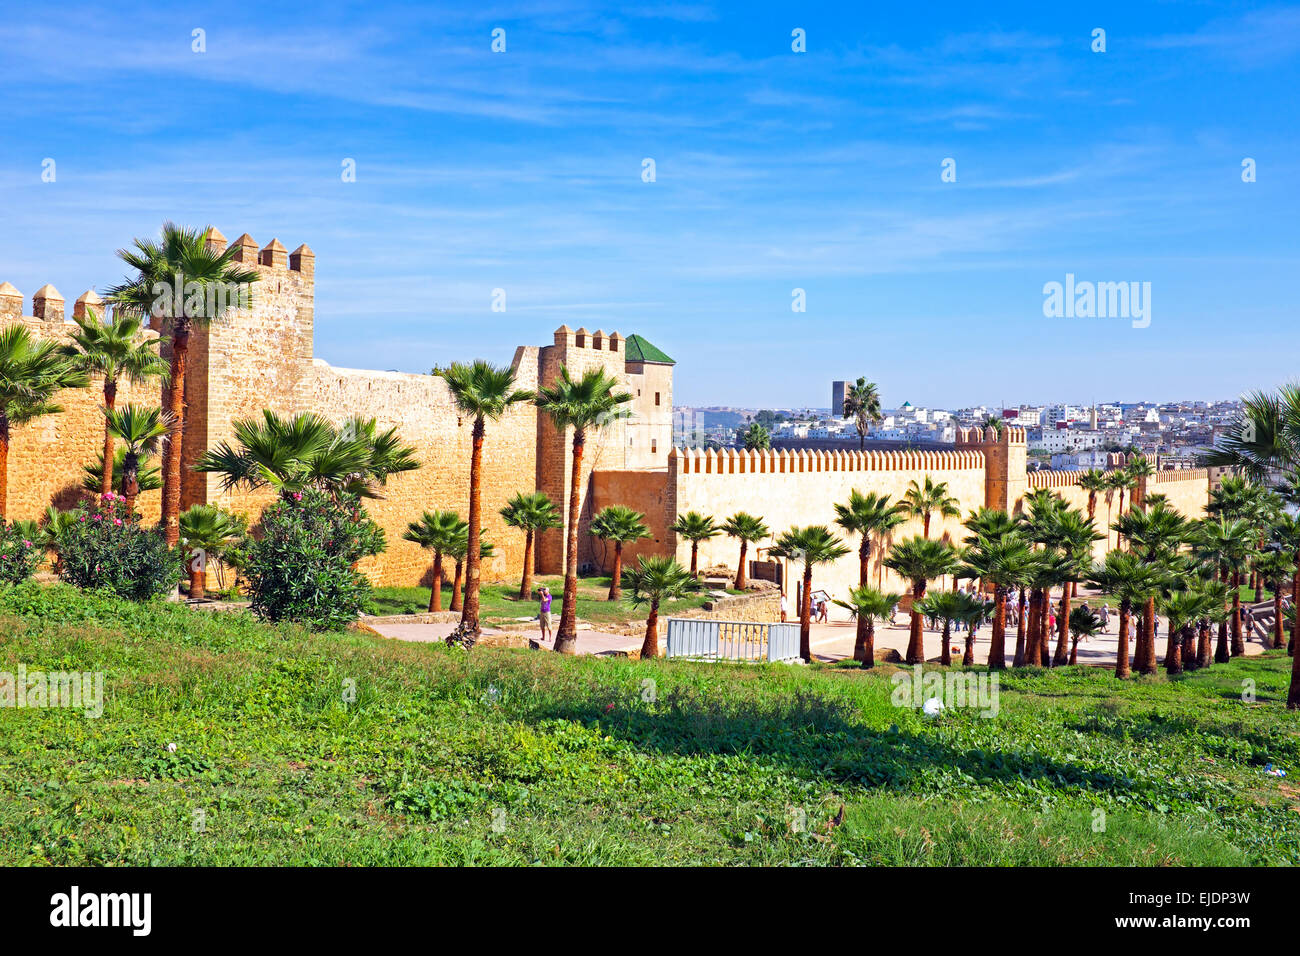 Old city walls in Rabat, Morocco Stock Photo